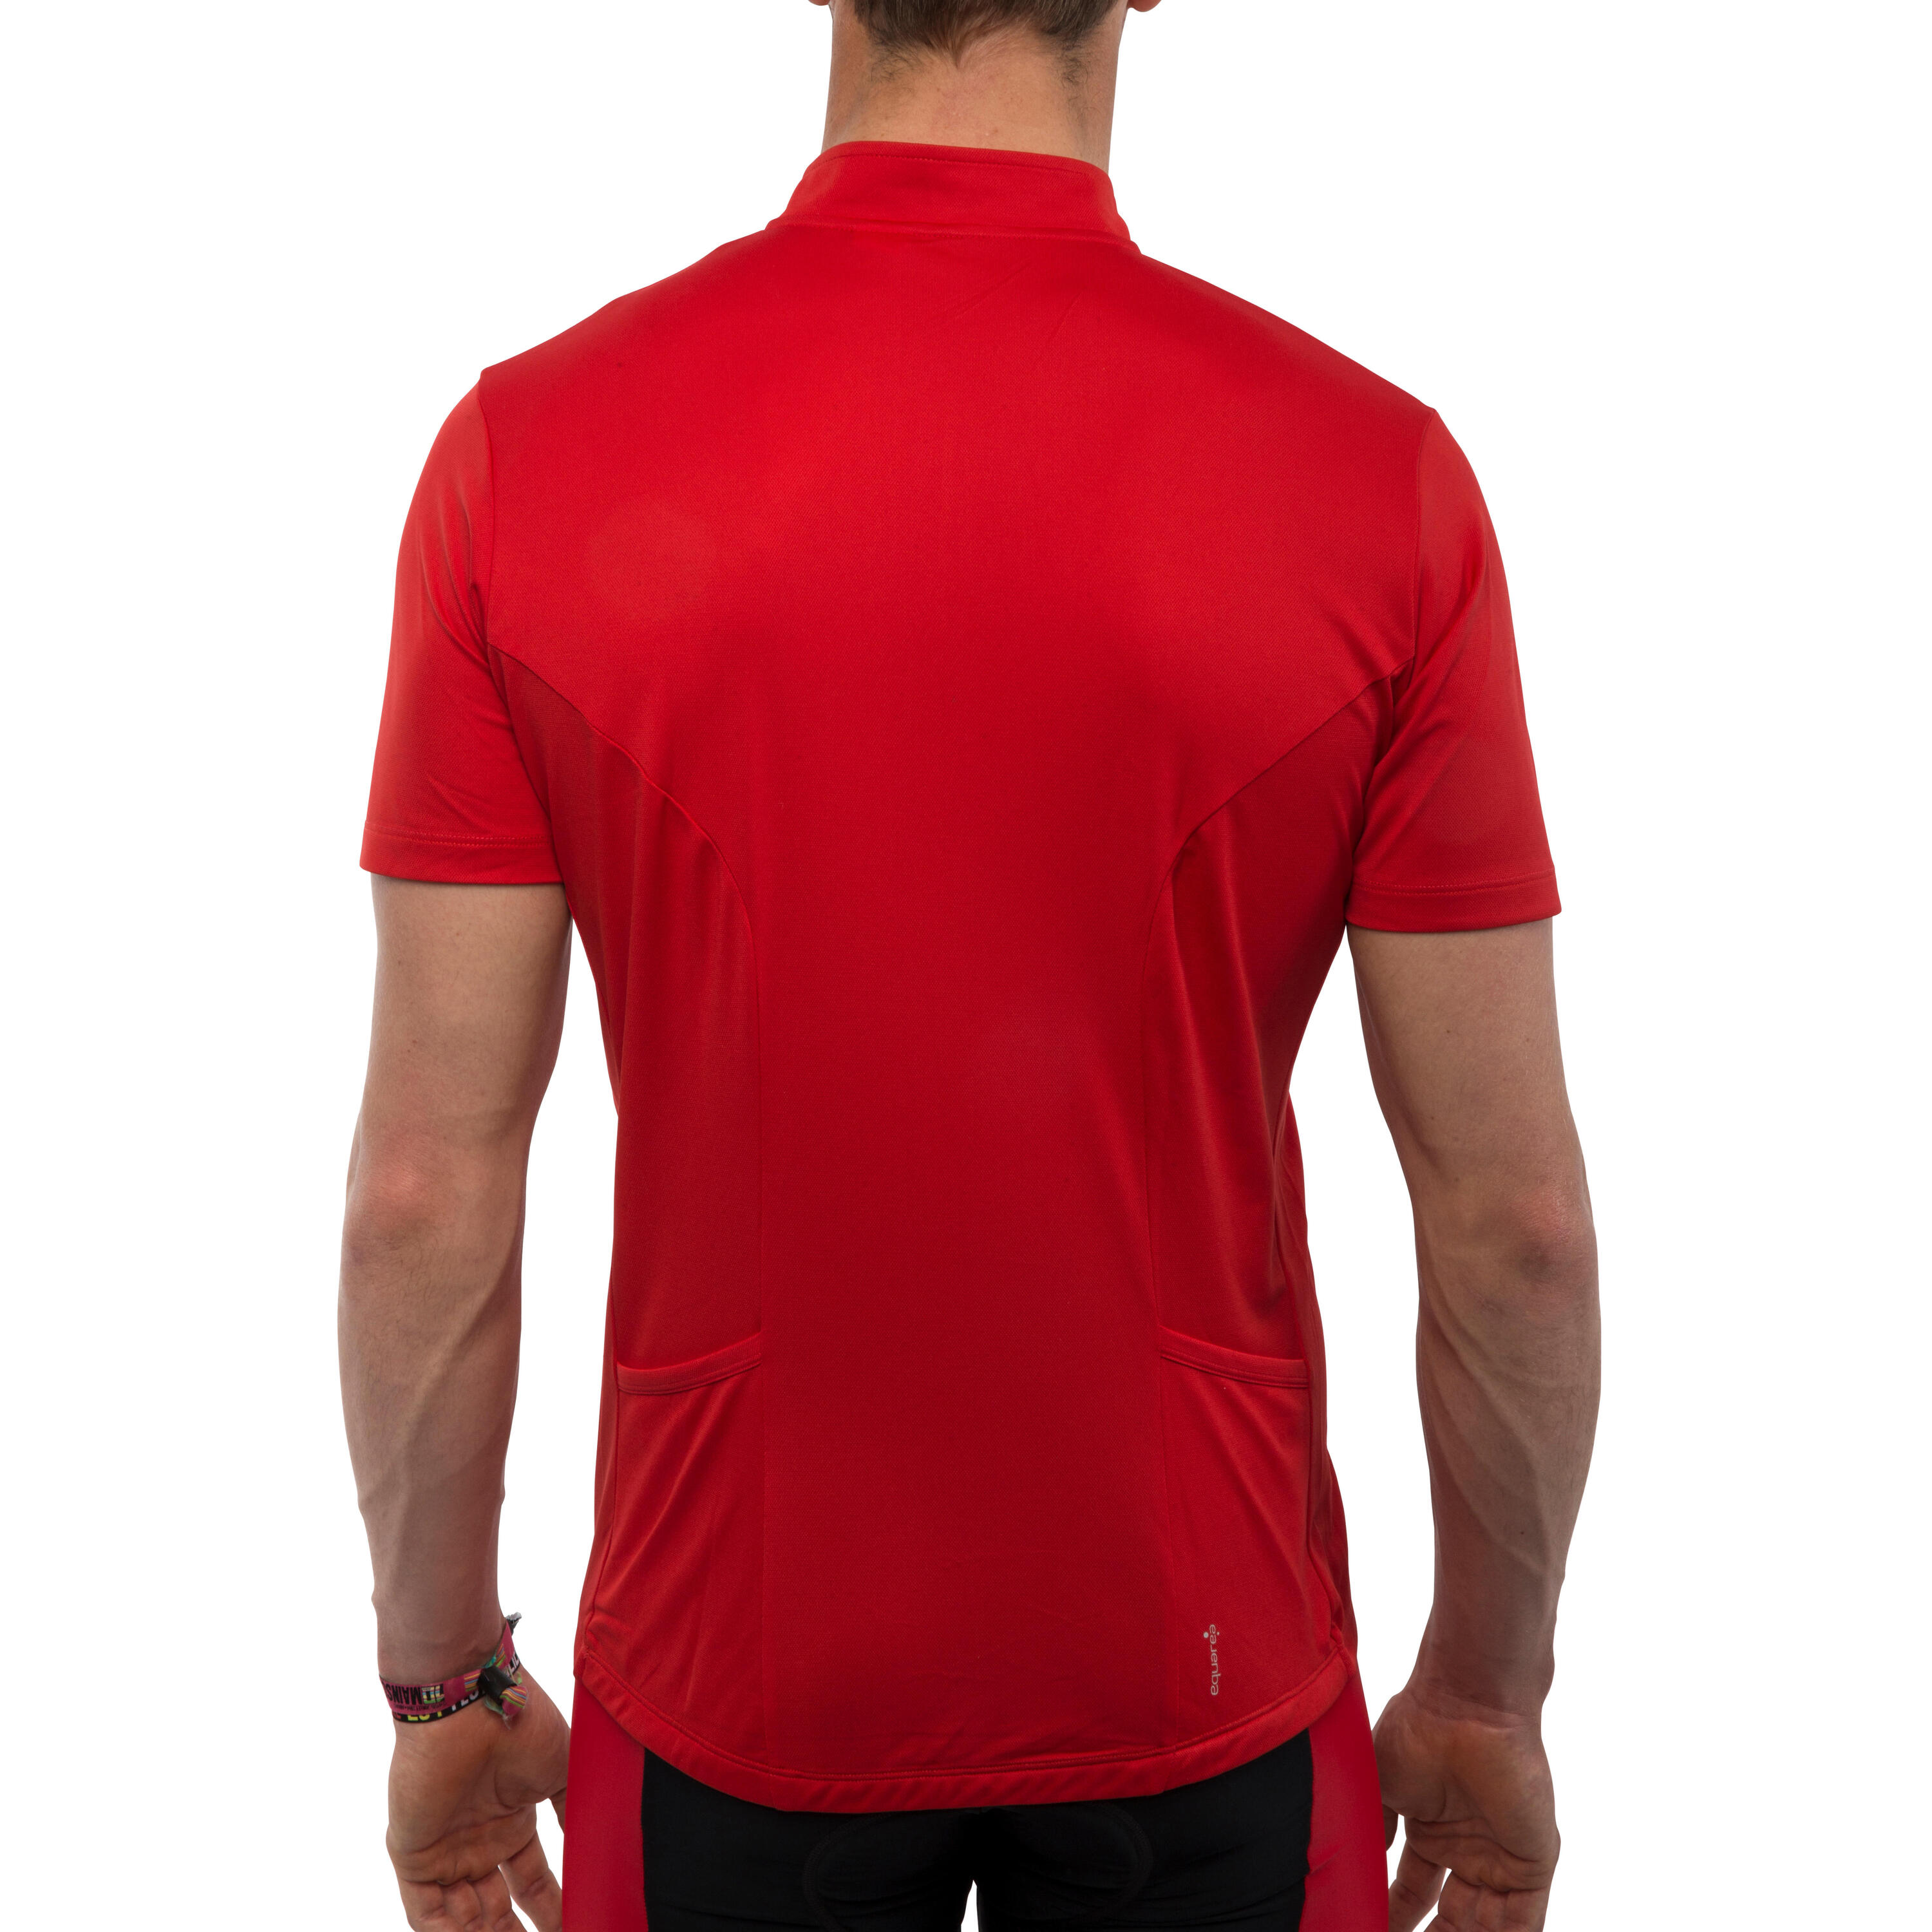 Roadcycling 100 Short-Sleeved Cycling Jersey - Red 4/11